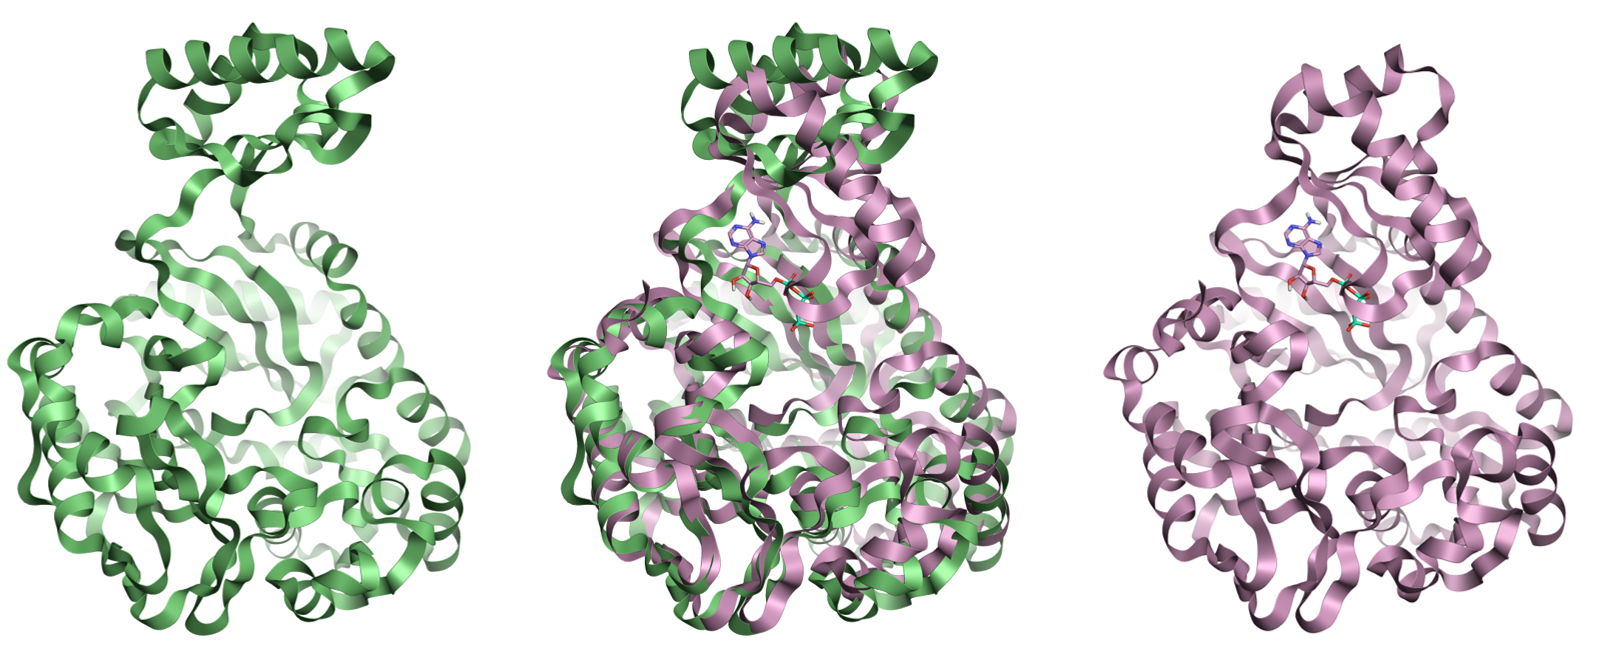 Example protein movements upon ATPbinding for the biotin carboxylase subunit of pyruvate carboxylase using crystal structures